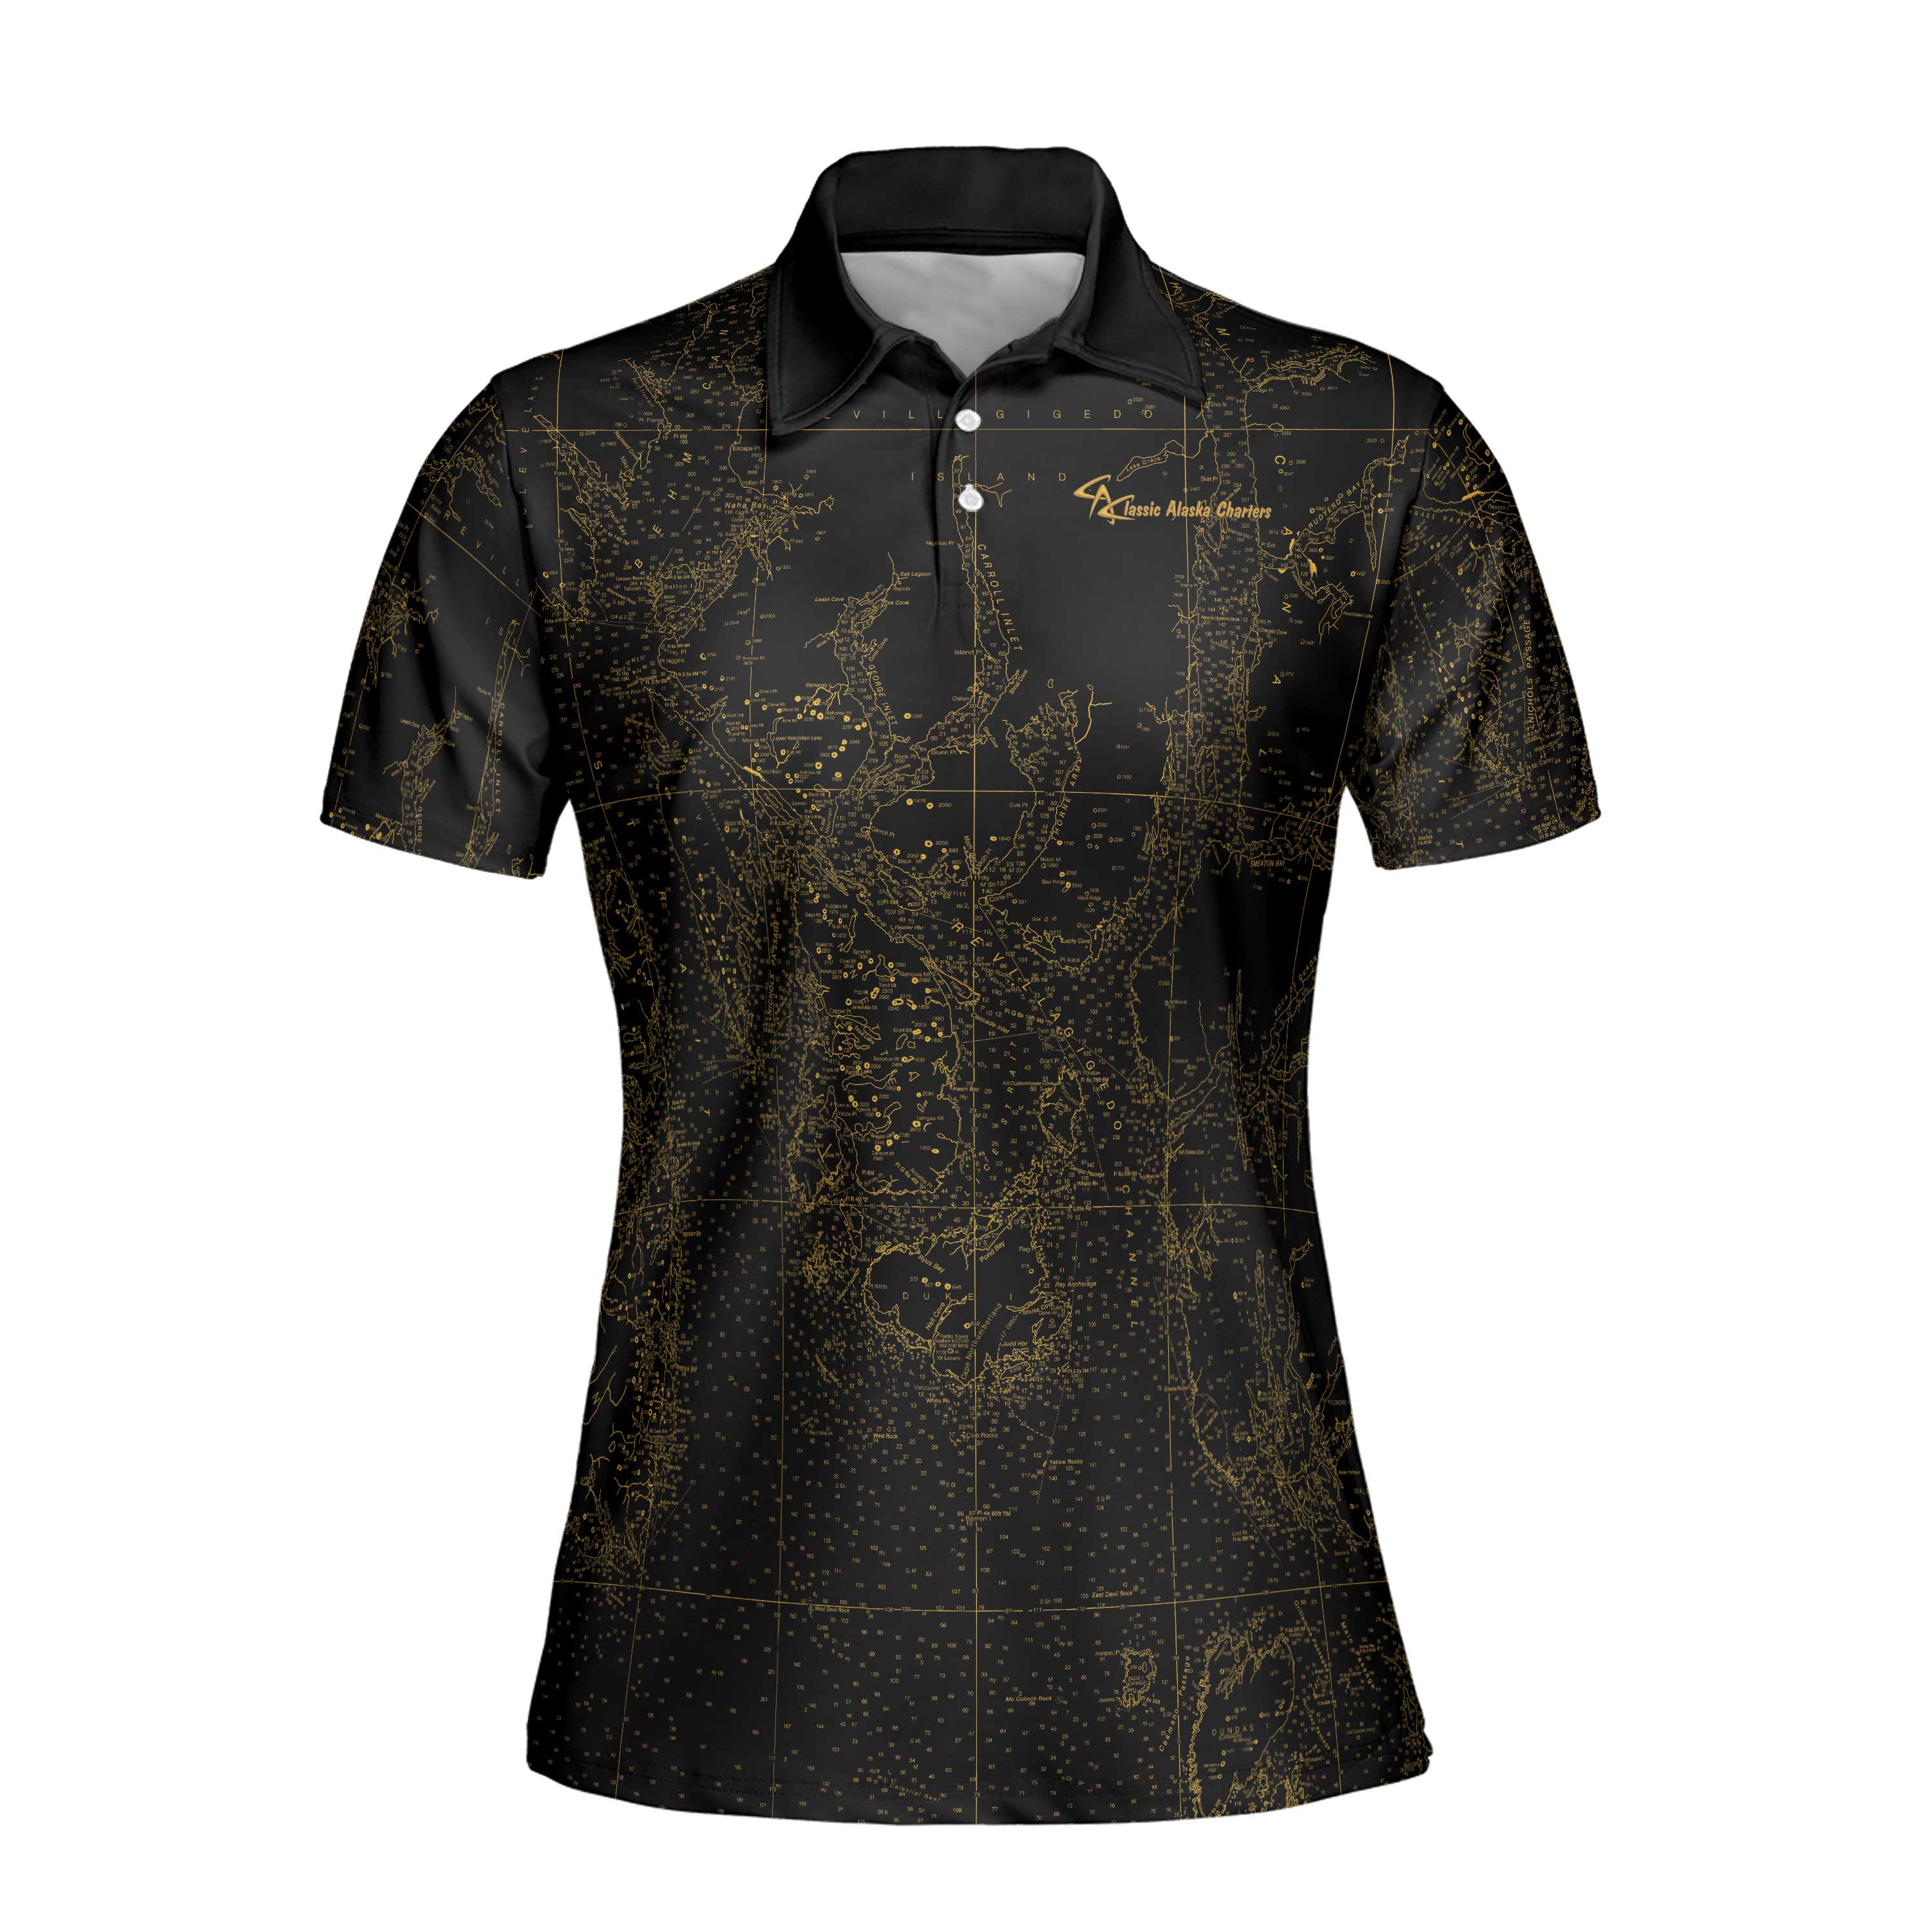 The CAC Midnight Gold Ketchikan Women's Polo